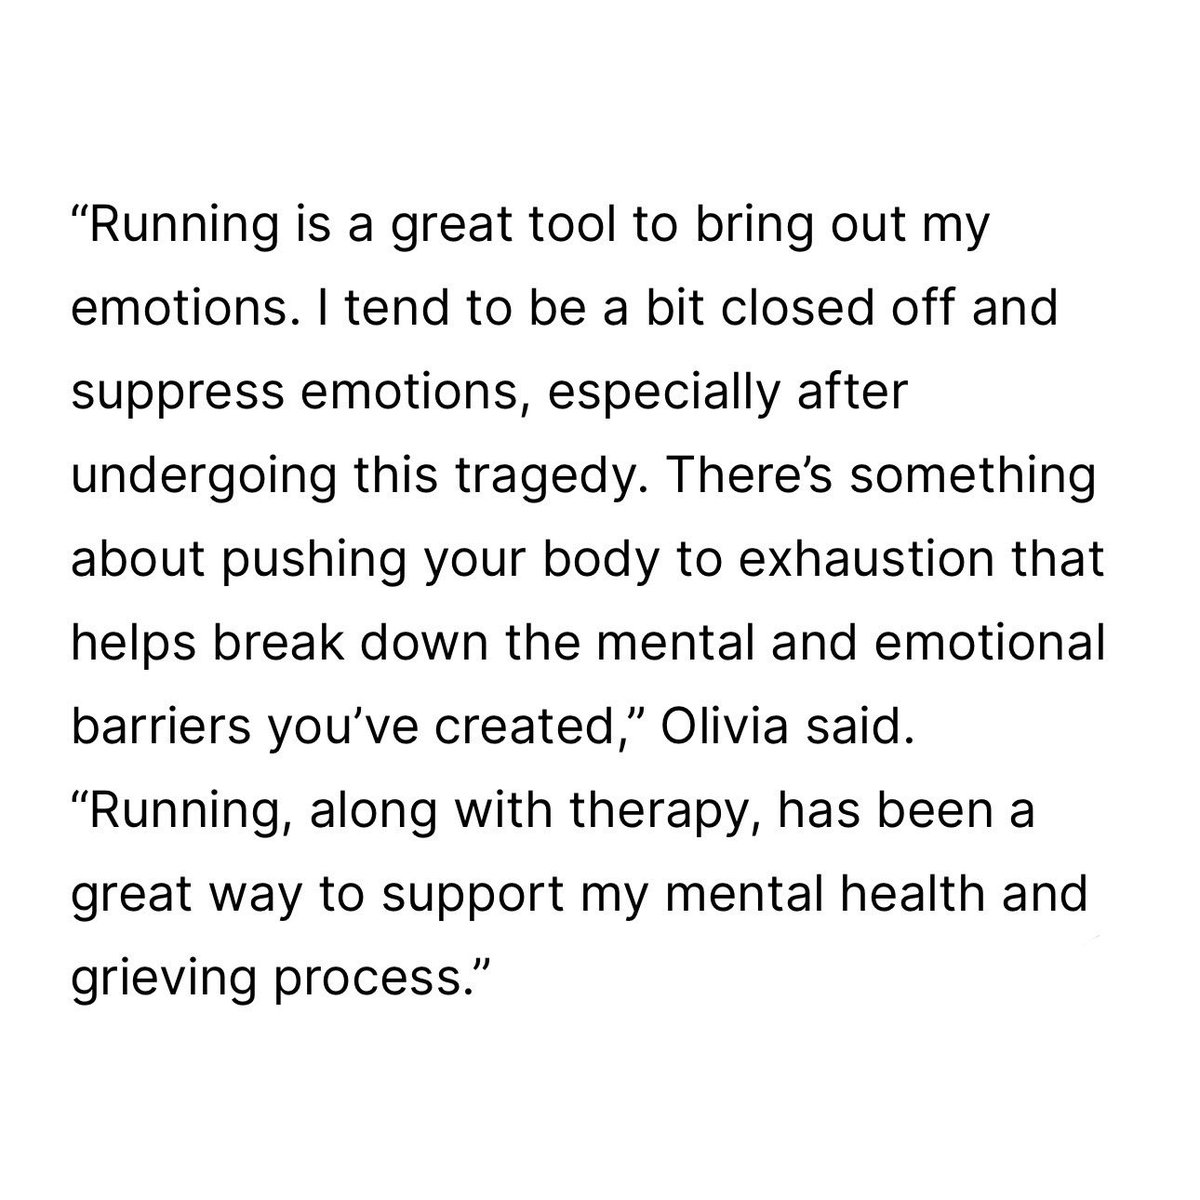 A huge thank you to @nyrr for the feature during Mental Health Awareness Month. 💚￼ Running has been a huge part of my grieving journey following the m*rd*r of my dad and uncle, and I hope that my story can help anyone else undergoing hardships: bit.ly/3Qs8AYC